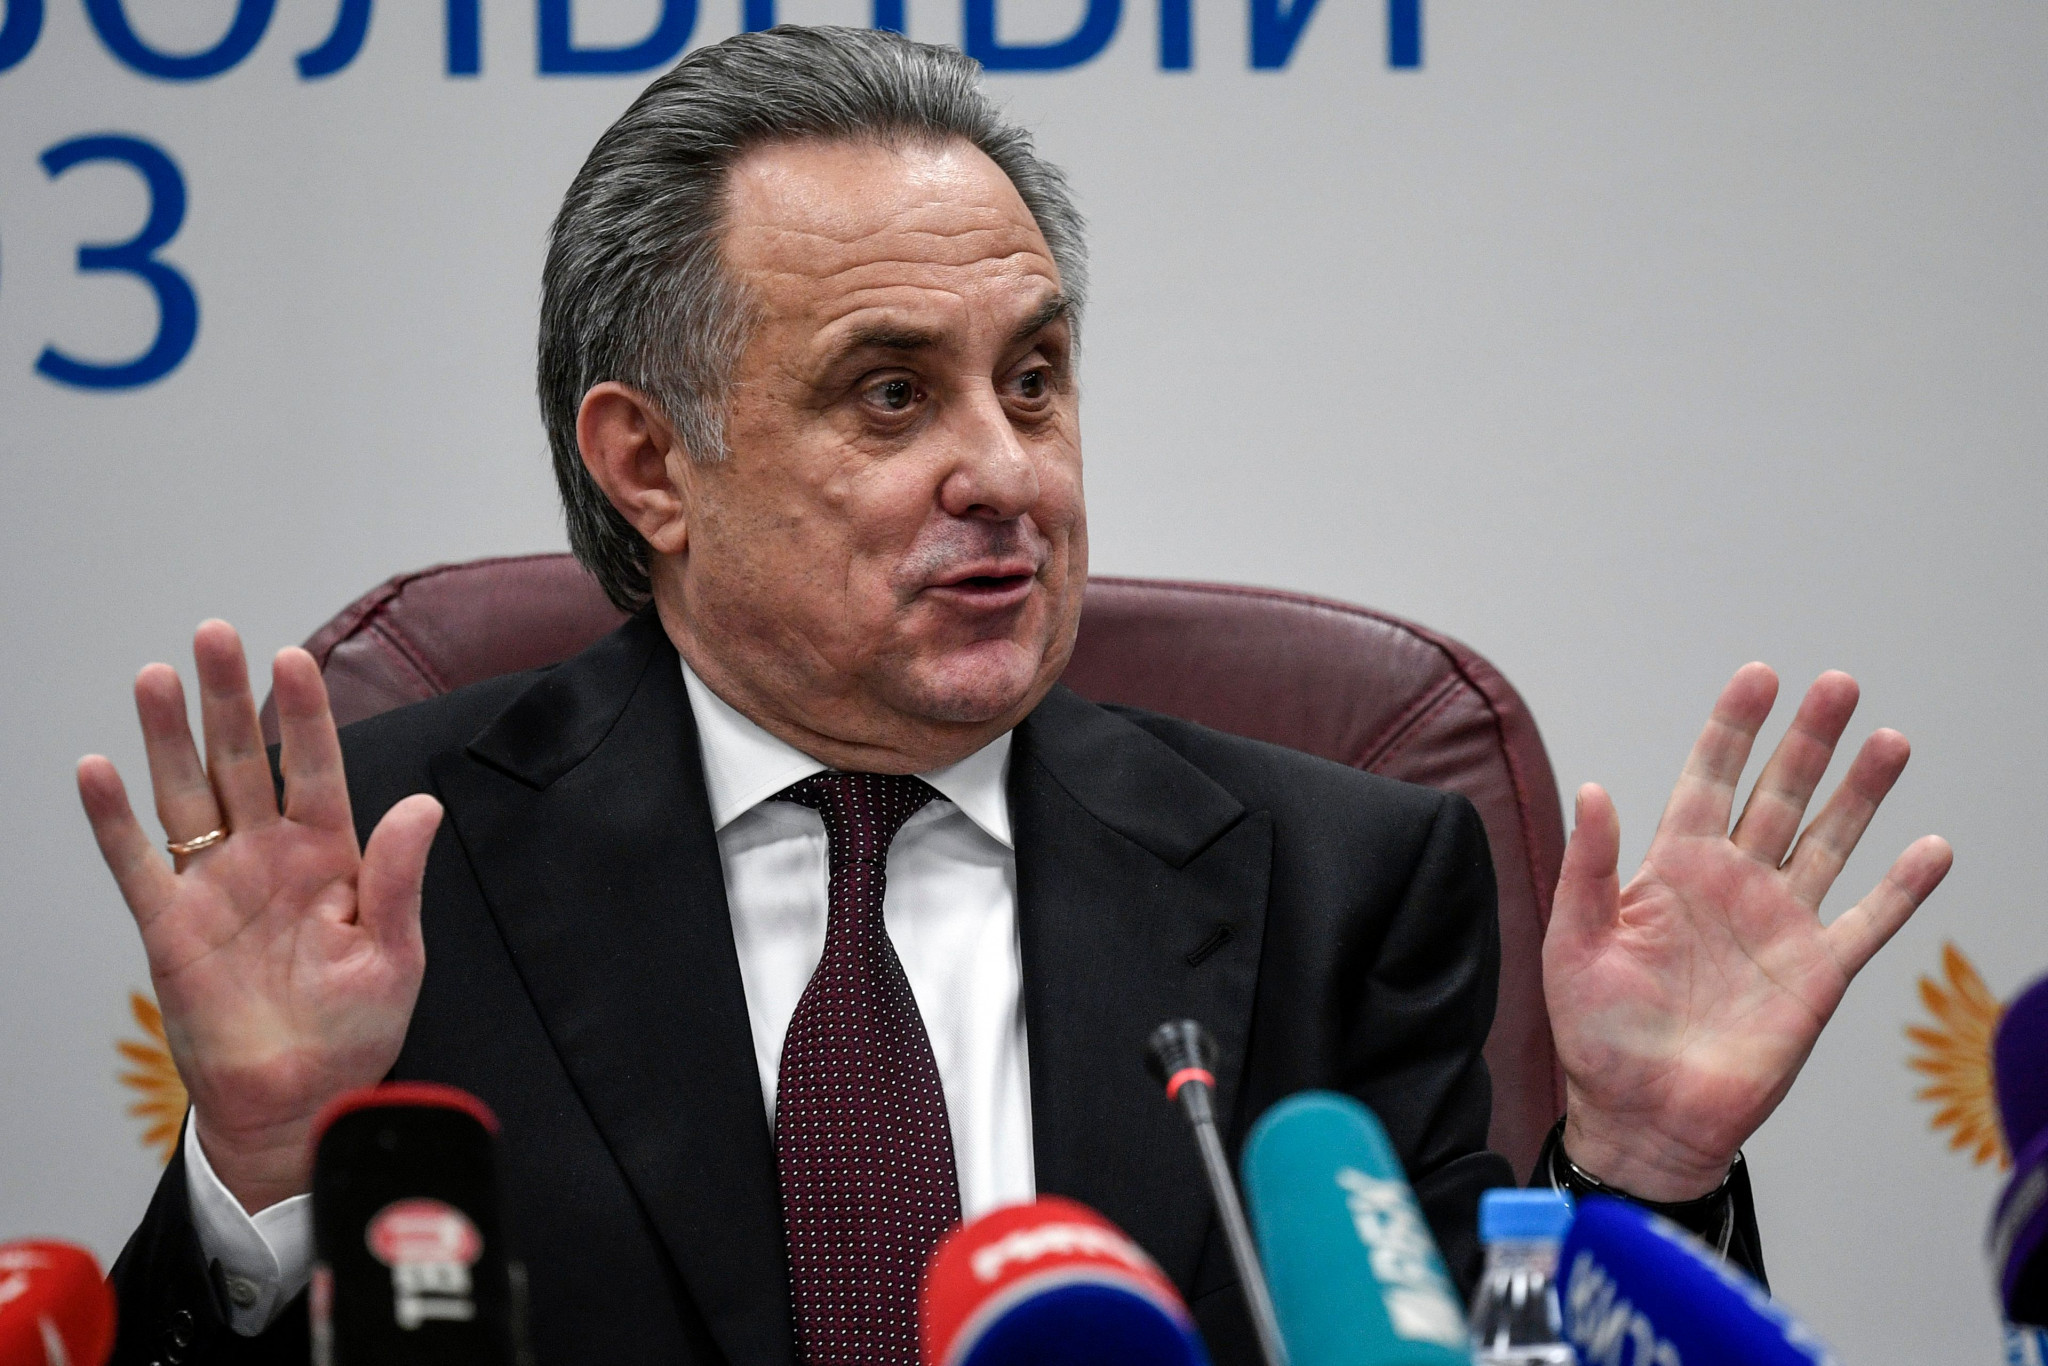 Putin defends Mutko and claims would be impossible to sack him over doping scandal